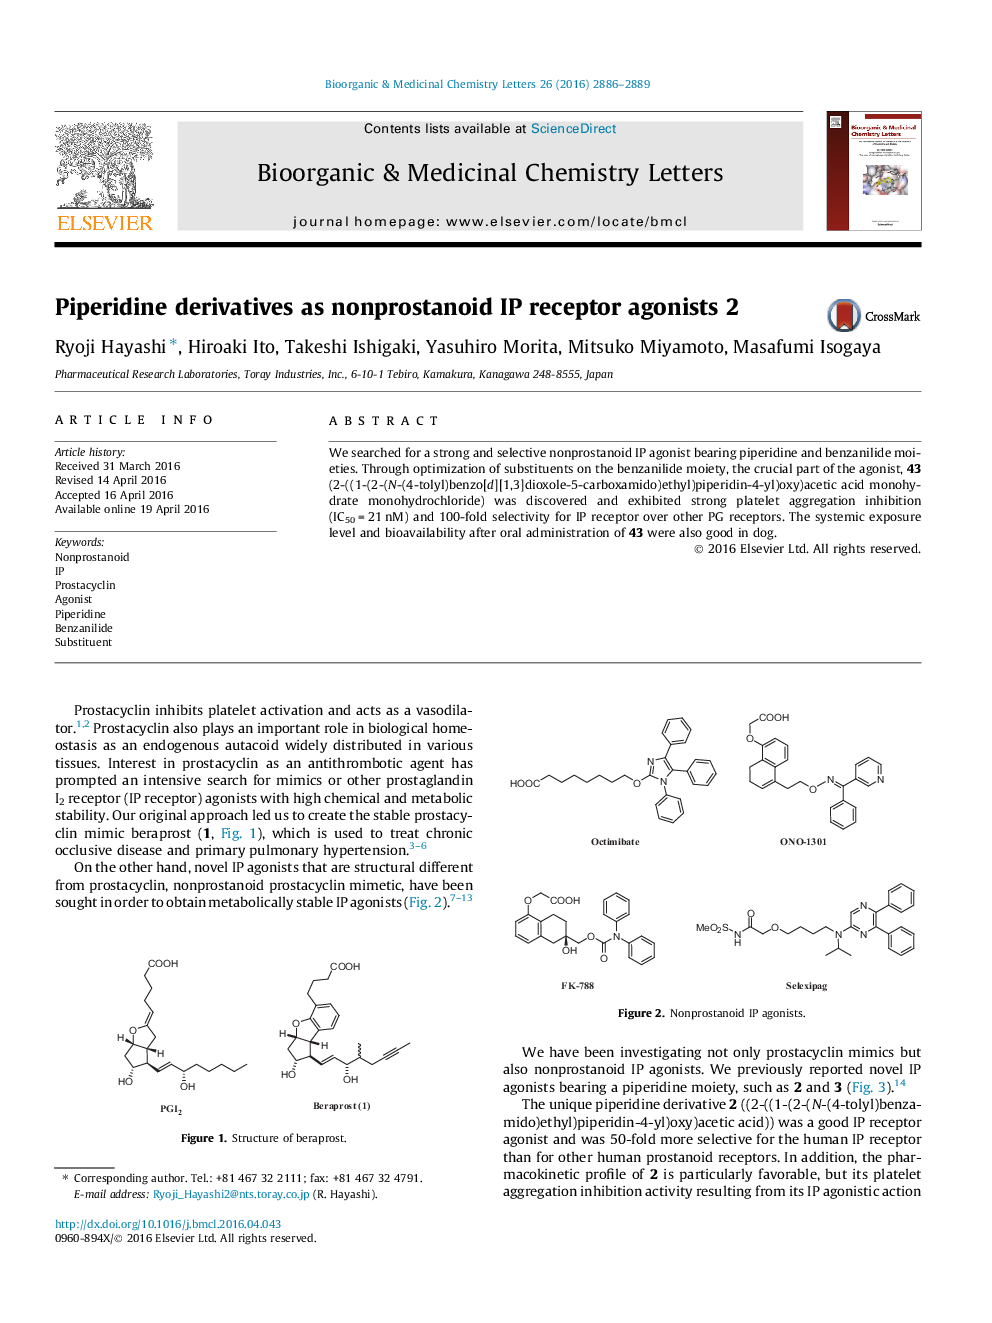 Piperidine derivatives as nonprostanoid IP receptor agonists 2